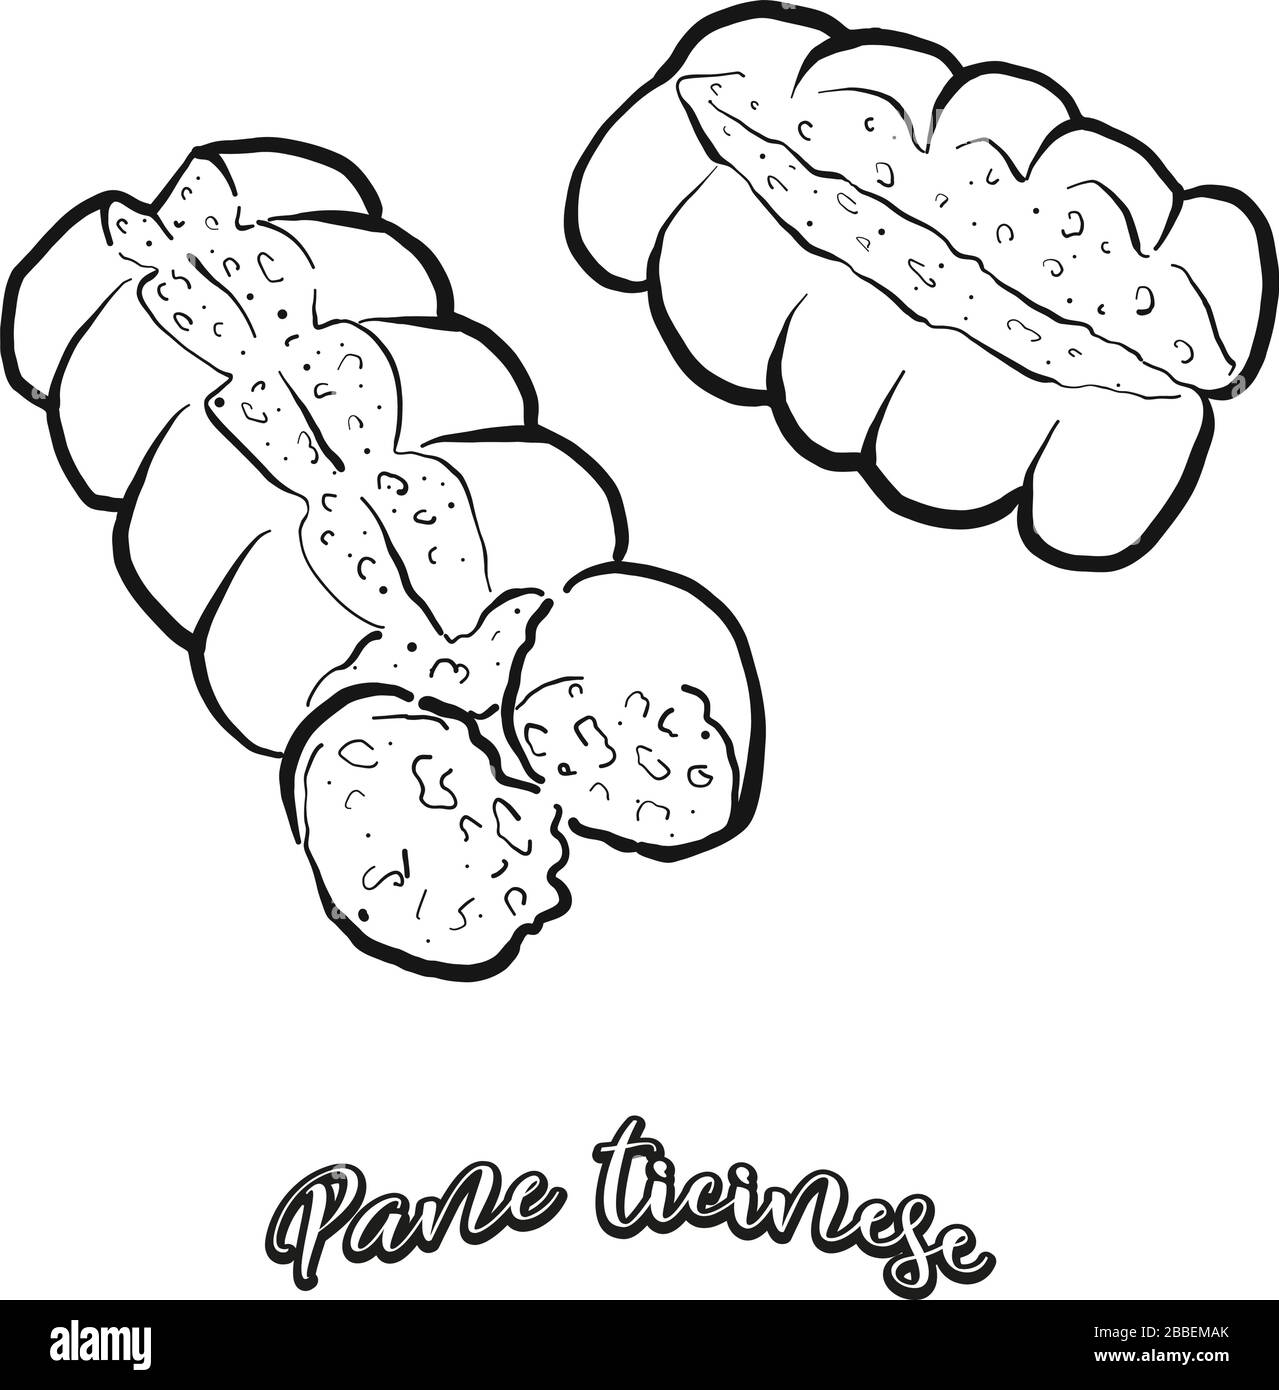 Pane ticinese food sketch separated on white. Vector drawing of Leavened, White, usually known in Switzerland. Food illustration series. Stock Vector